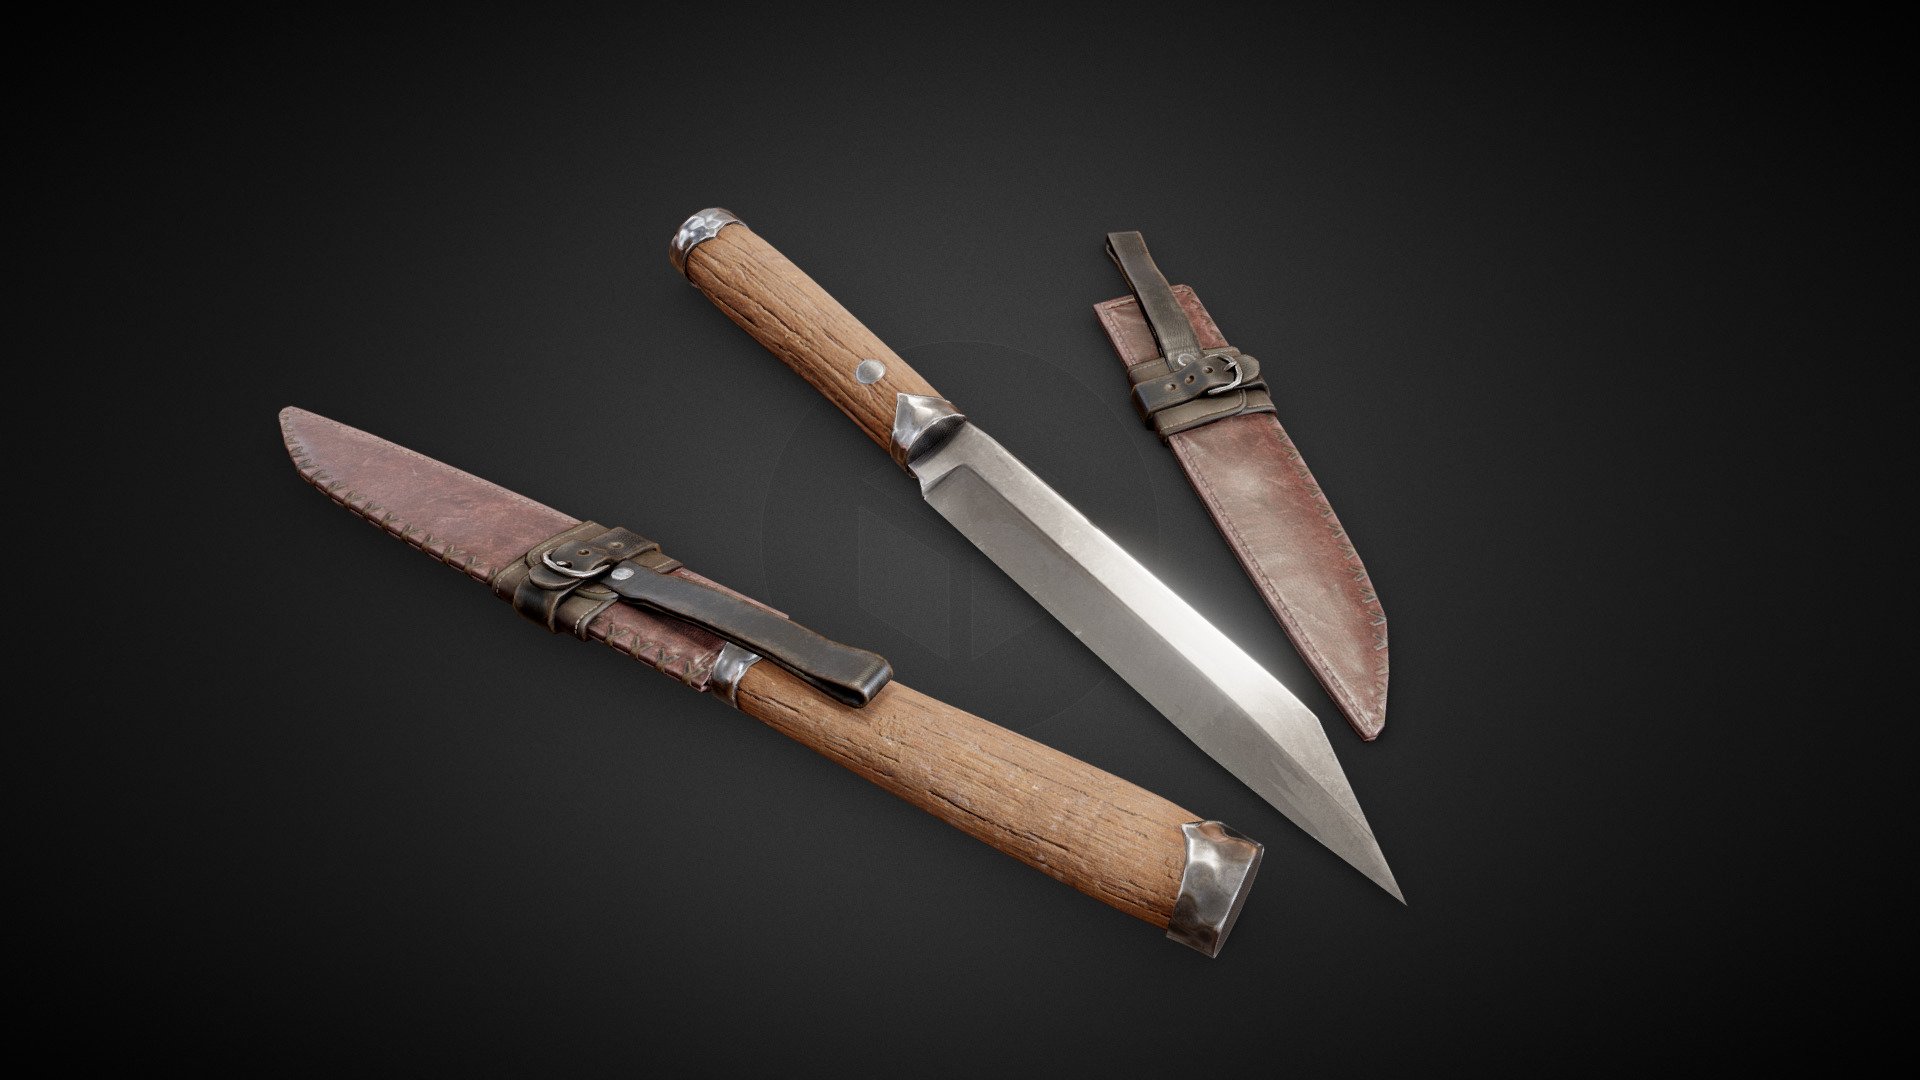 Simple knife with a leather sheath for use as clutter or a low-level weapon.

Made in Blender, textured with Quixel Mixer - Medieval/Fantasy Knife - Download Free 3D model by Aike (@anathlyst) 3d model